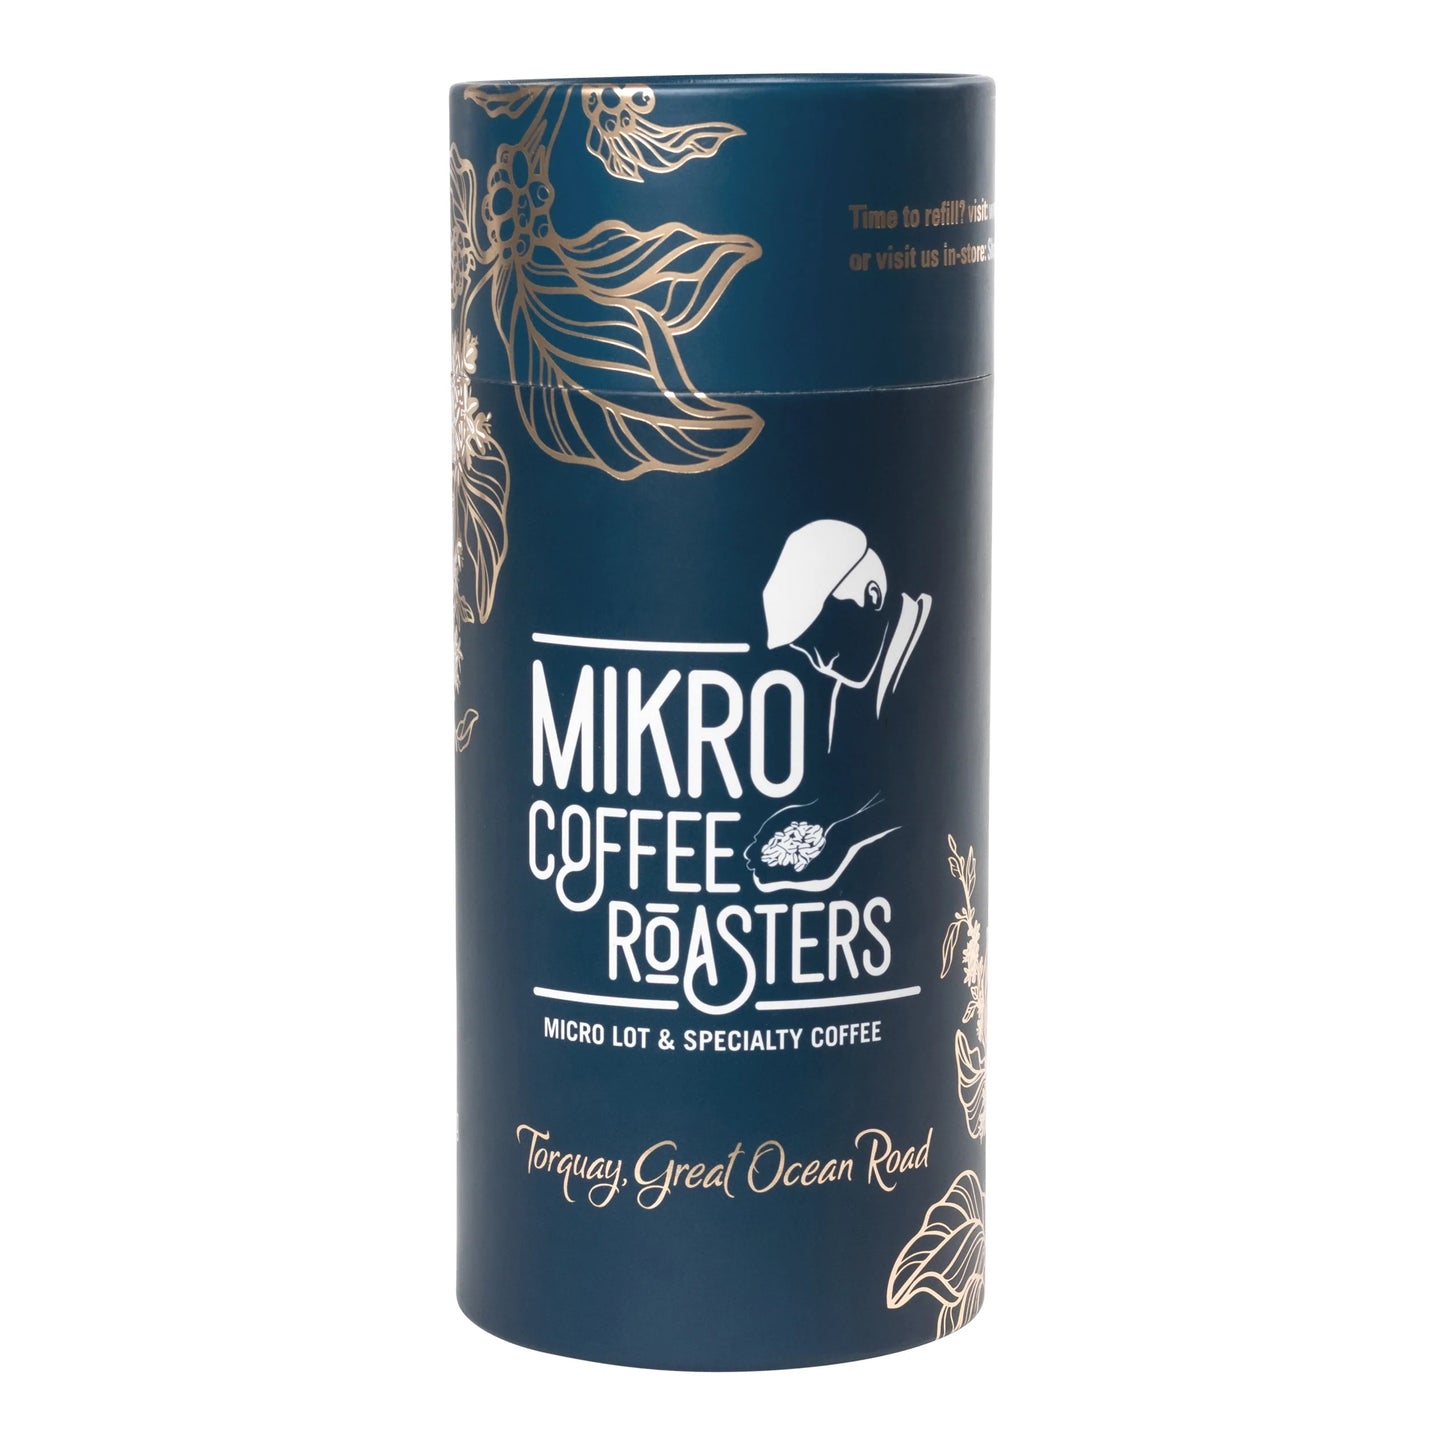 Subscribe & Save 10% On Premium Mikro Blends - Mikro Coffee Roasters Torquay